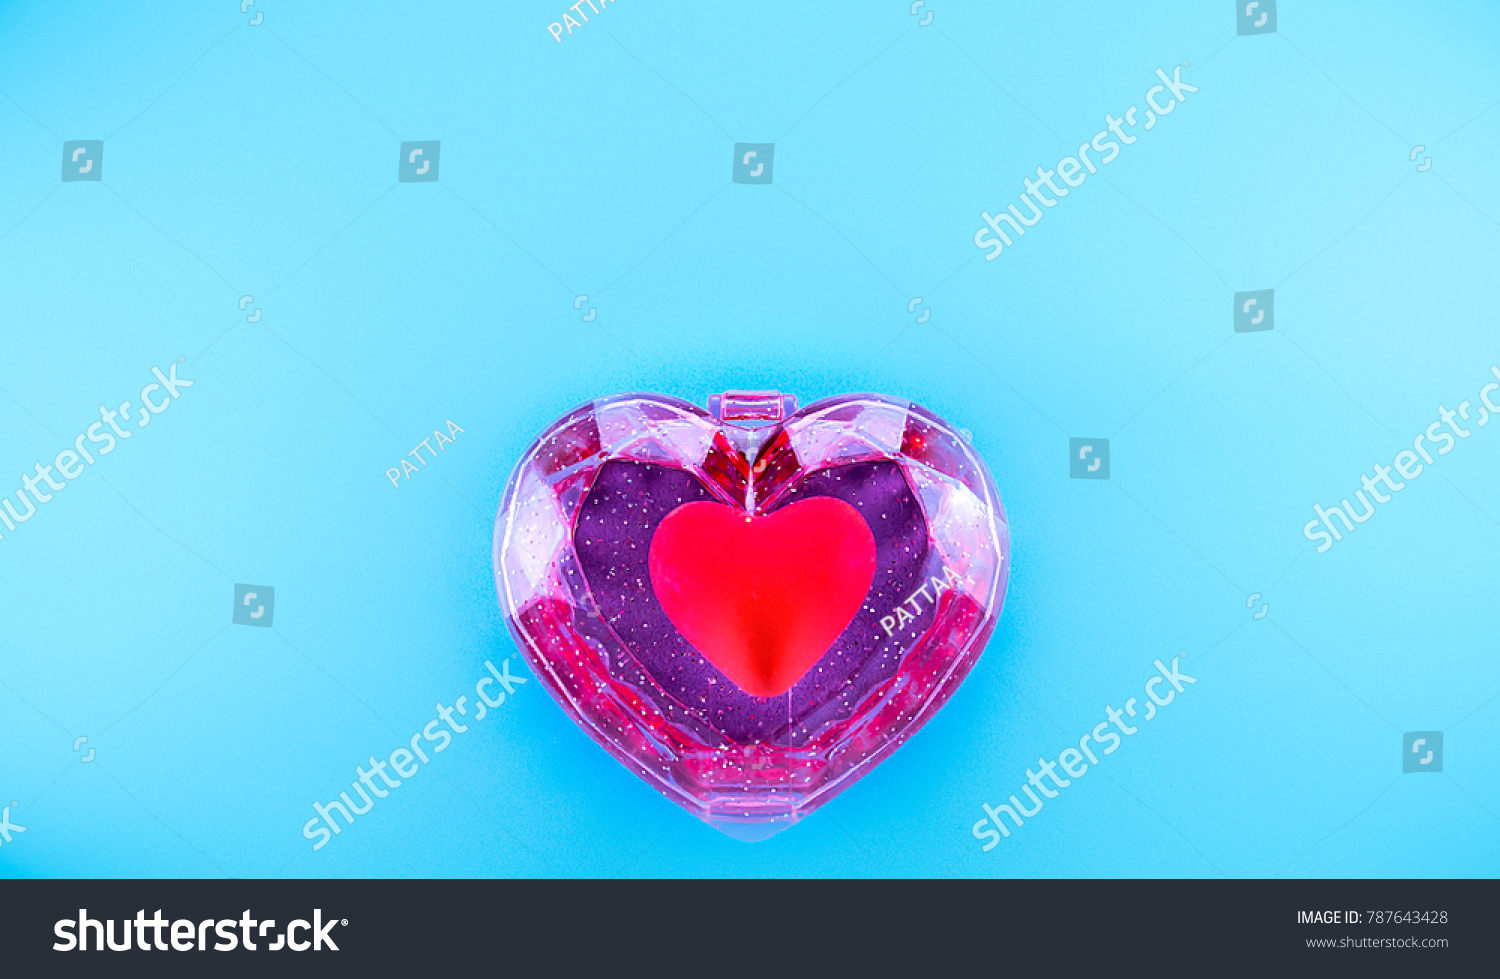 Red heart in the heart-shaped cartridge red on blue background style soft.
Concept:Keep the love for those we love. For valentine's day. #787643428